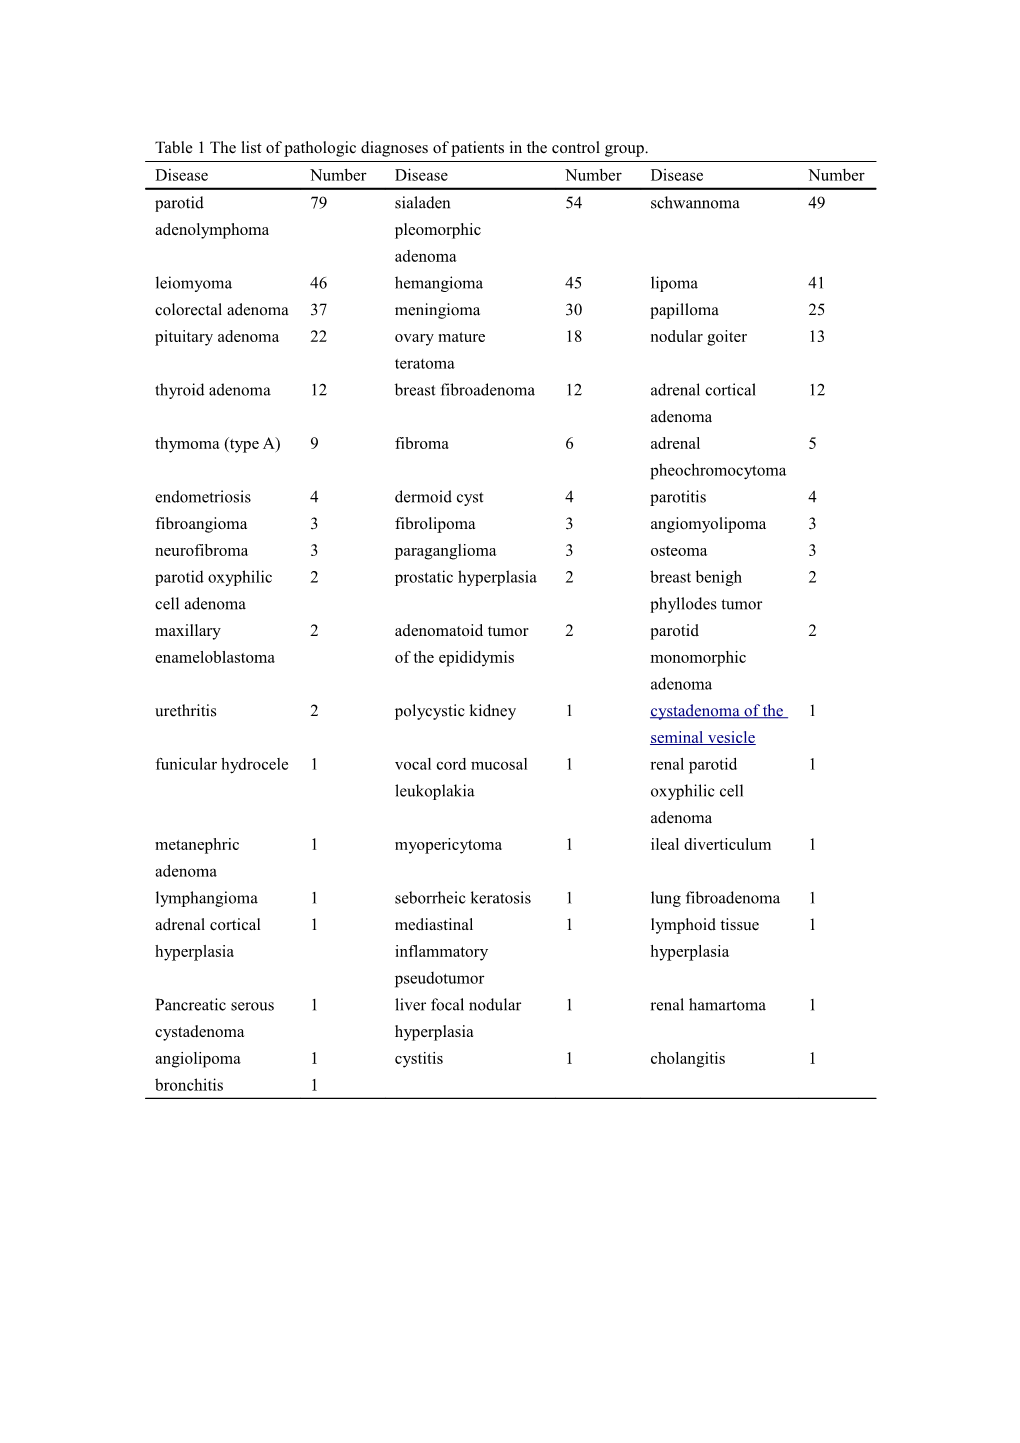 Table 1 the List of Pathologic Diagnoses of Patients in the Control Group